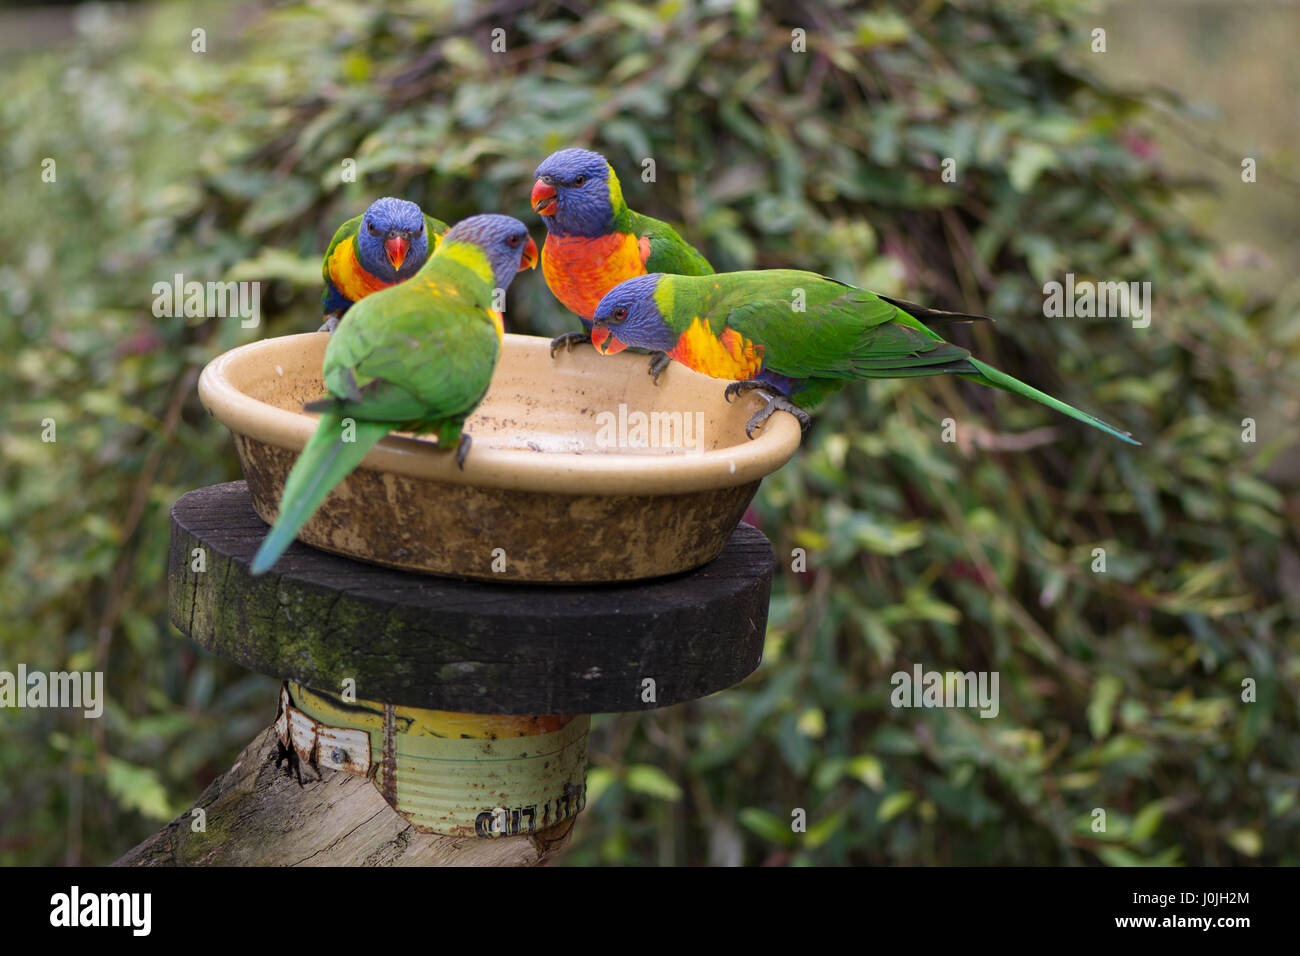 Four wild rainbow lorikeets (Trichoglossus moluccanus) at a feeder, a native Australian parrot, taken in South Australia. Shallow depth used with focu Stock Photo